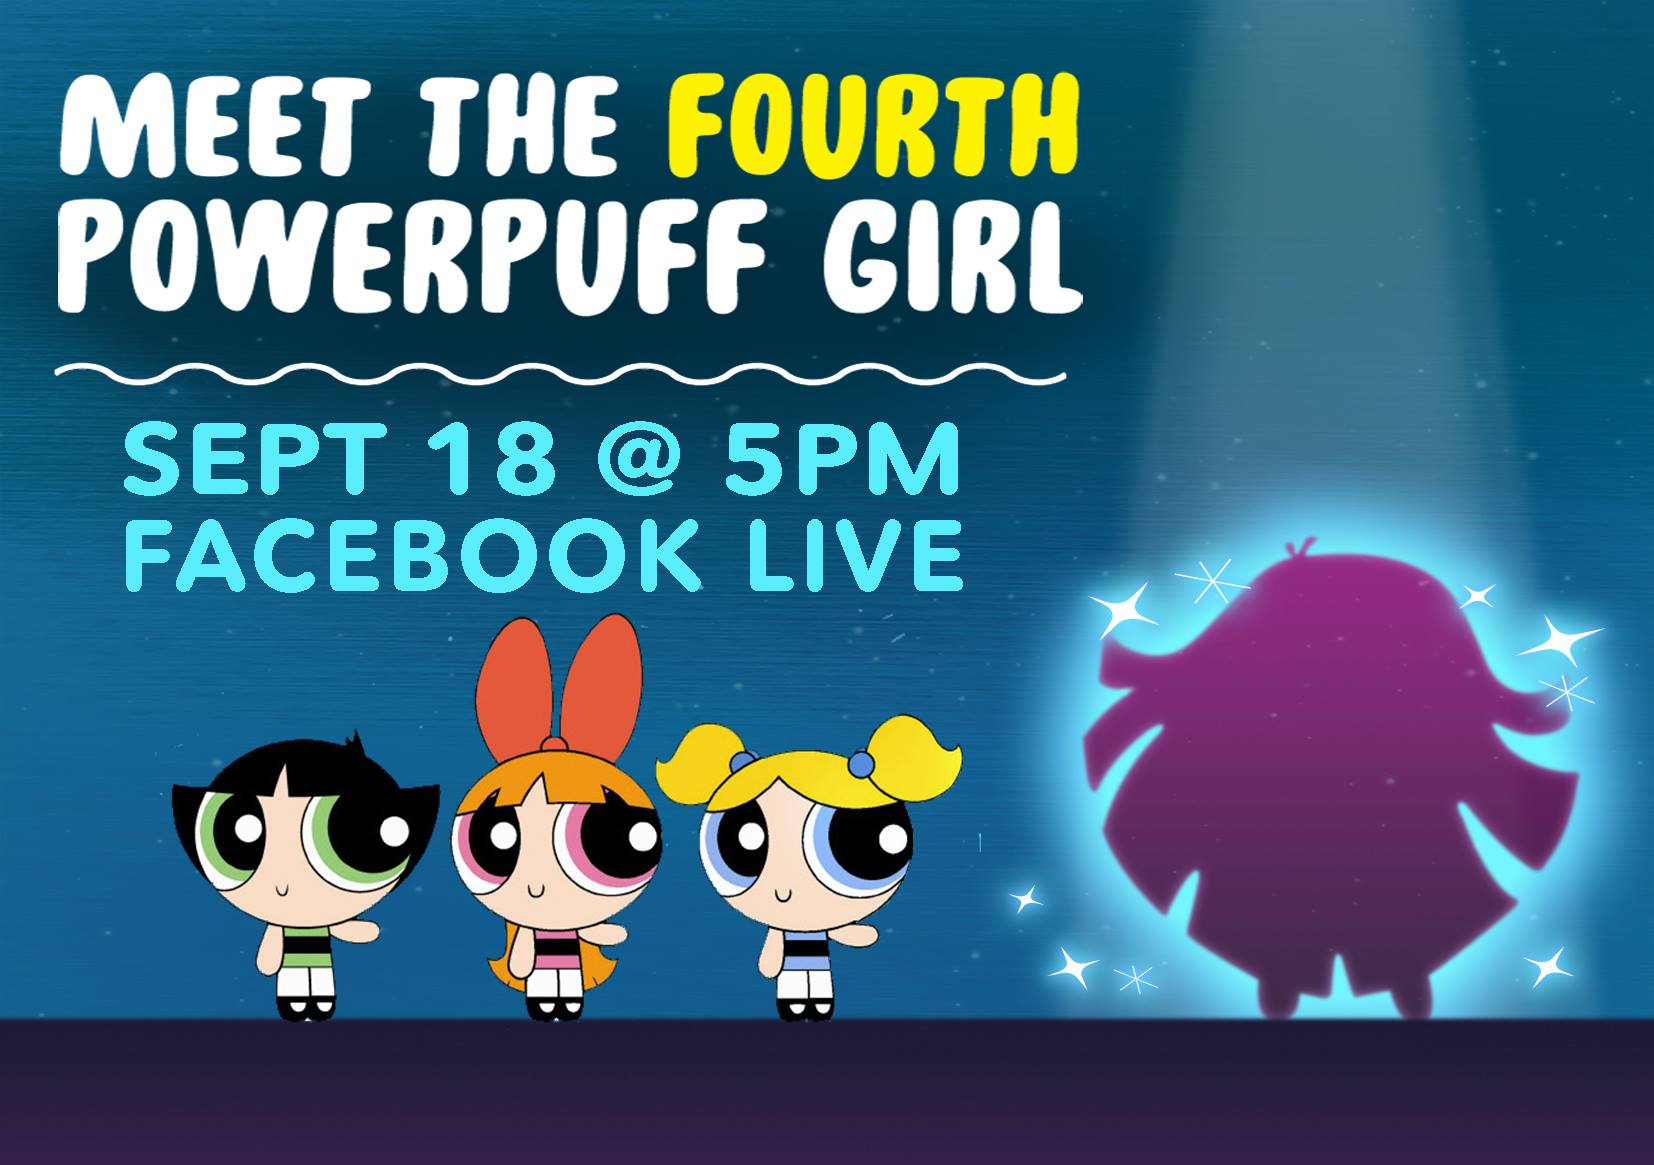 Everything You Knew about The Powerpuff Girls is About to Change